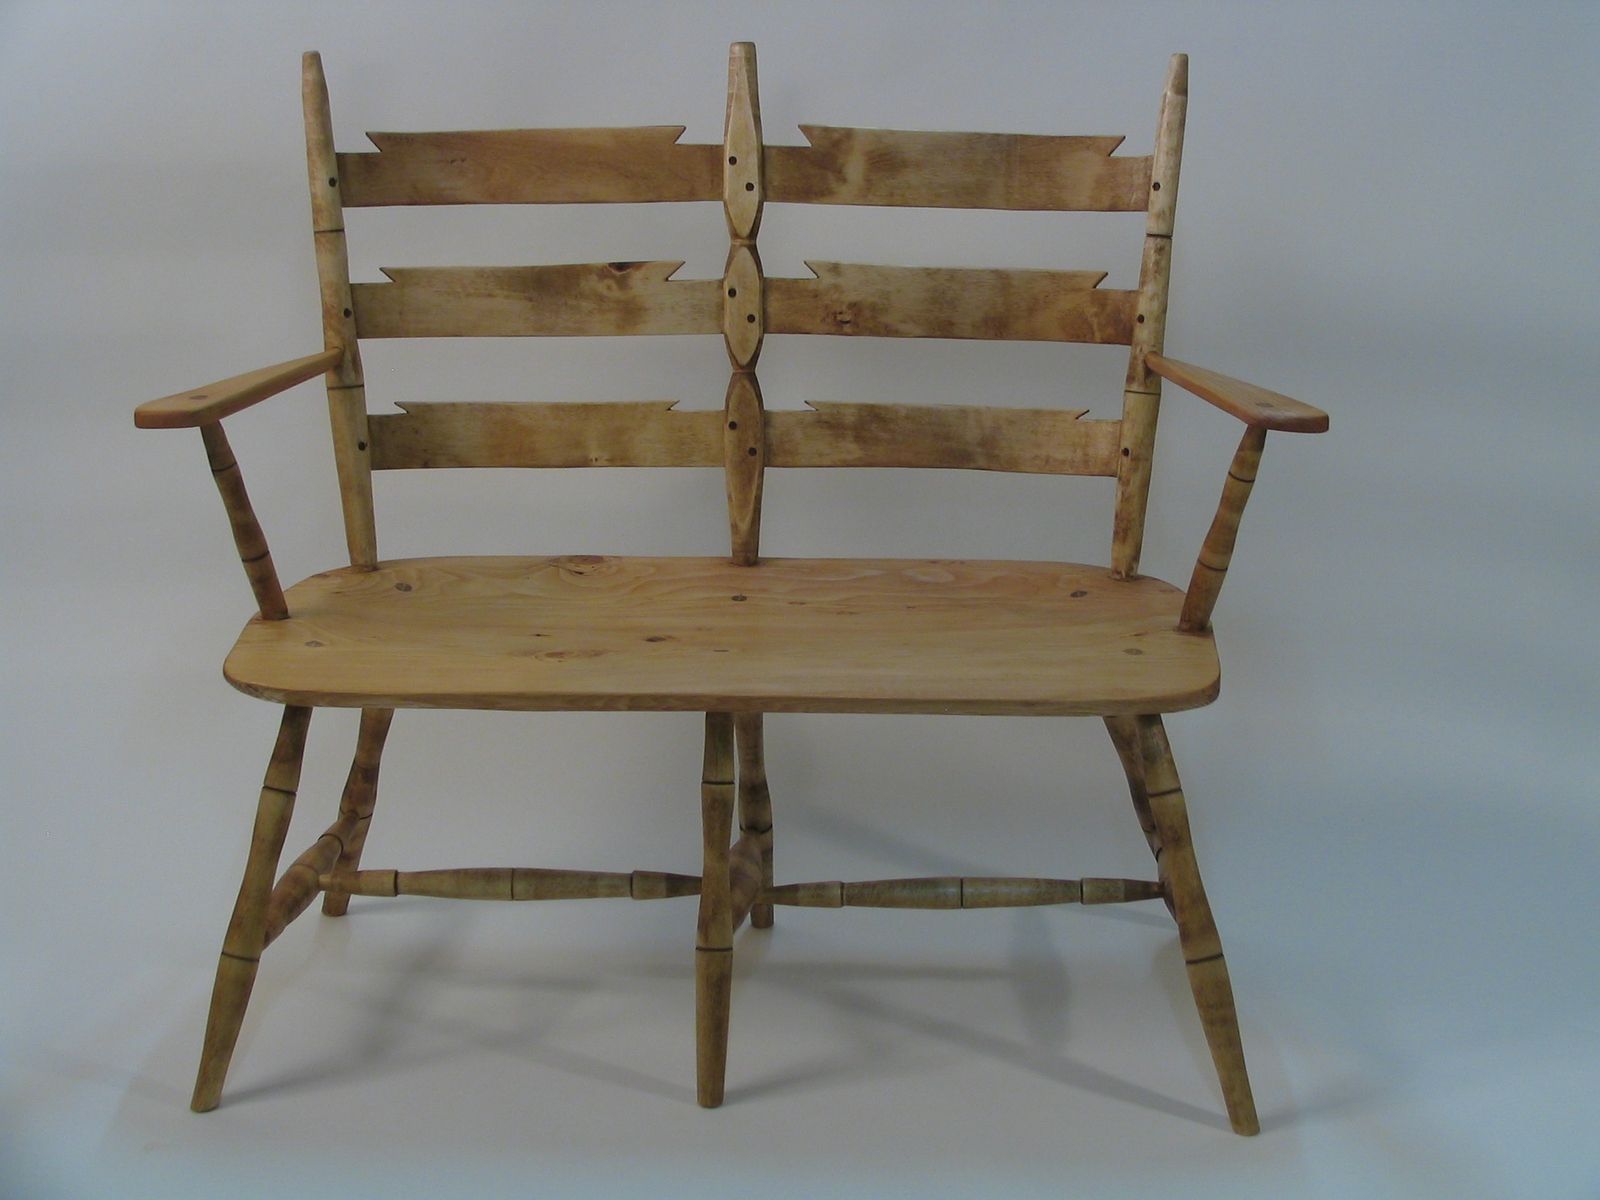 Handmade Windsor Bench by Silvertree Woodworking